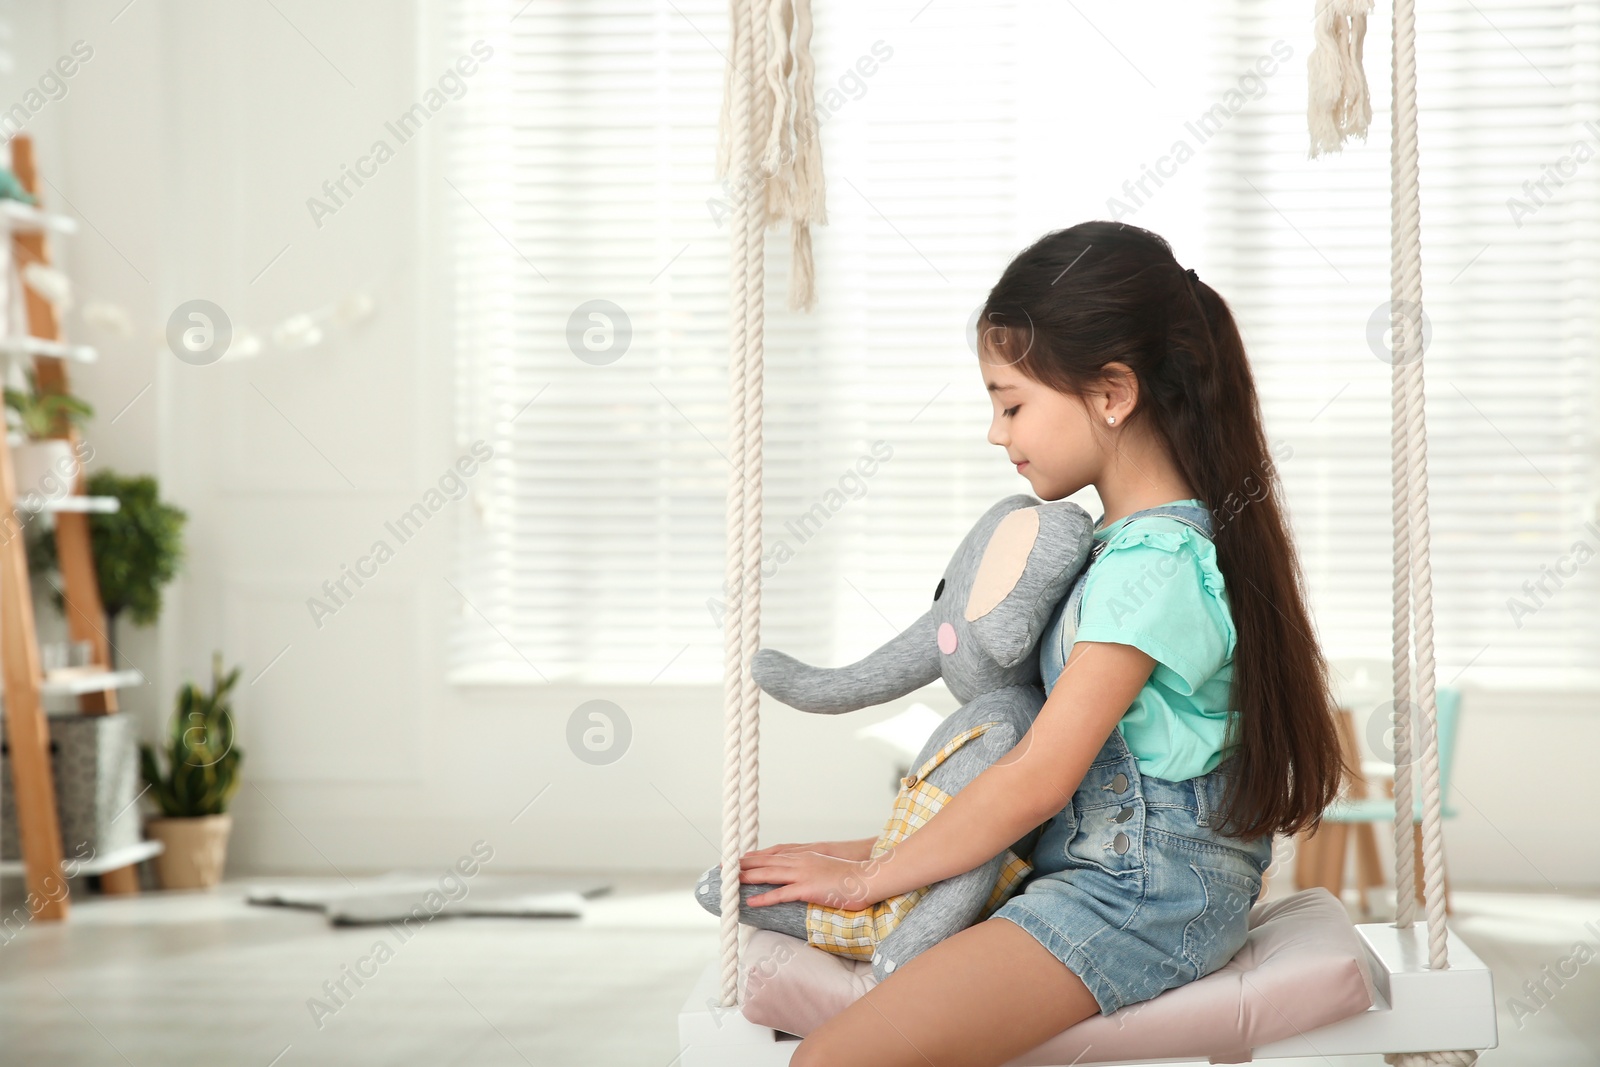 Photo of Cute little girl playing with toy elephant on swing at home. Space for text